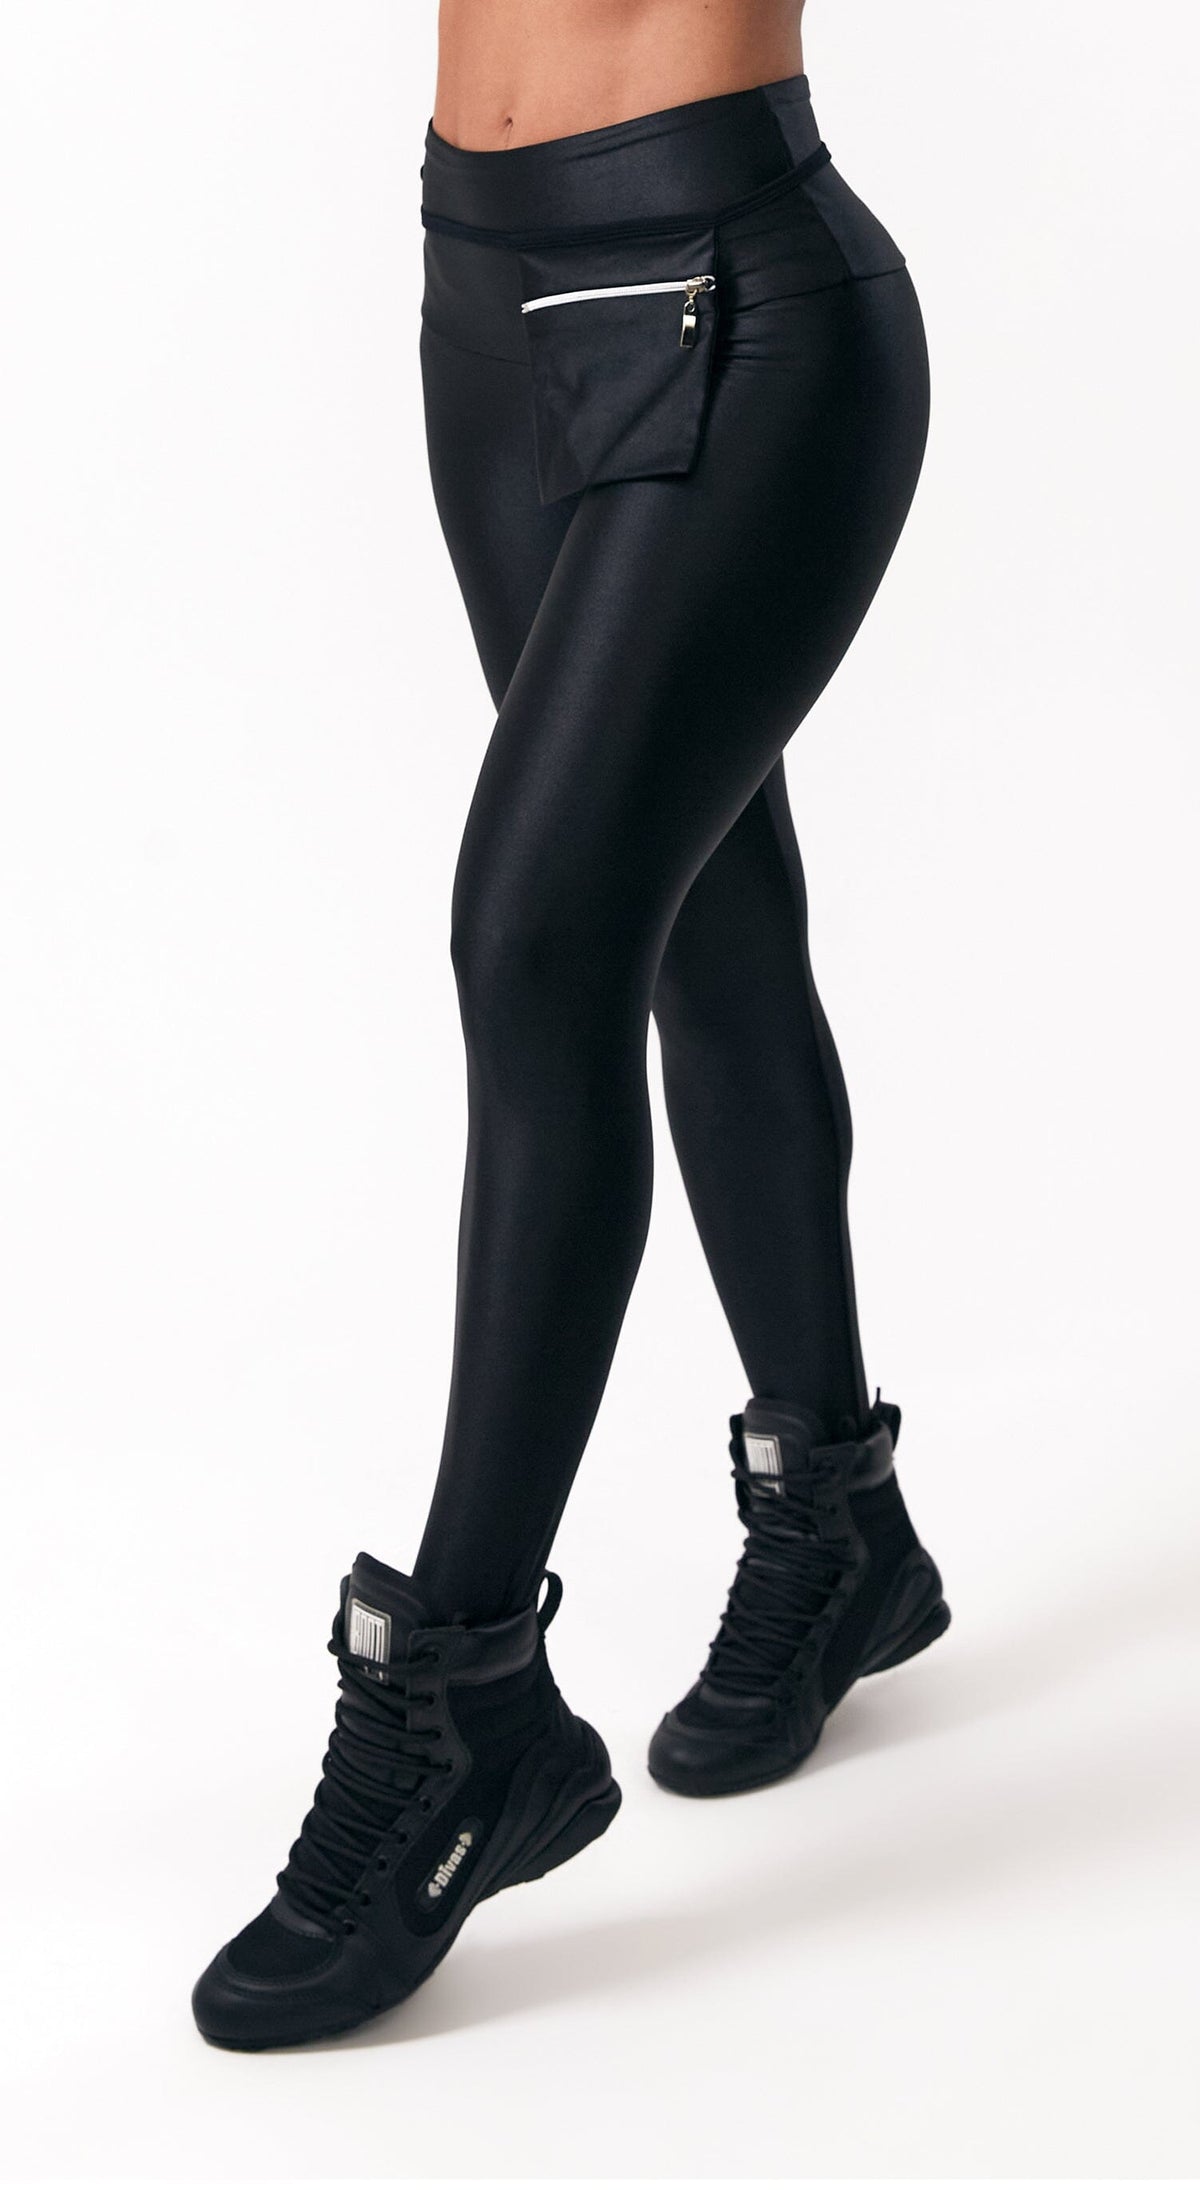 Legging - The Essential Black With Pockets